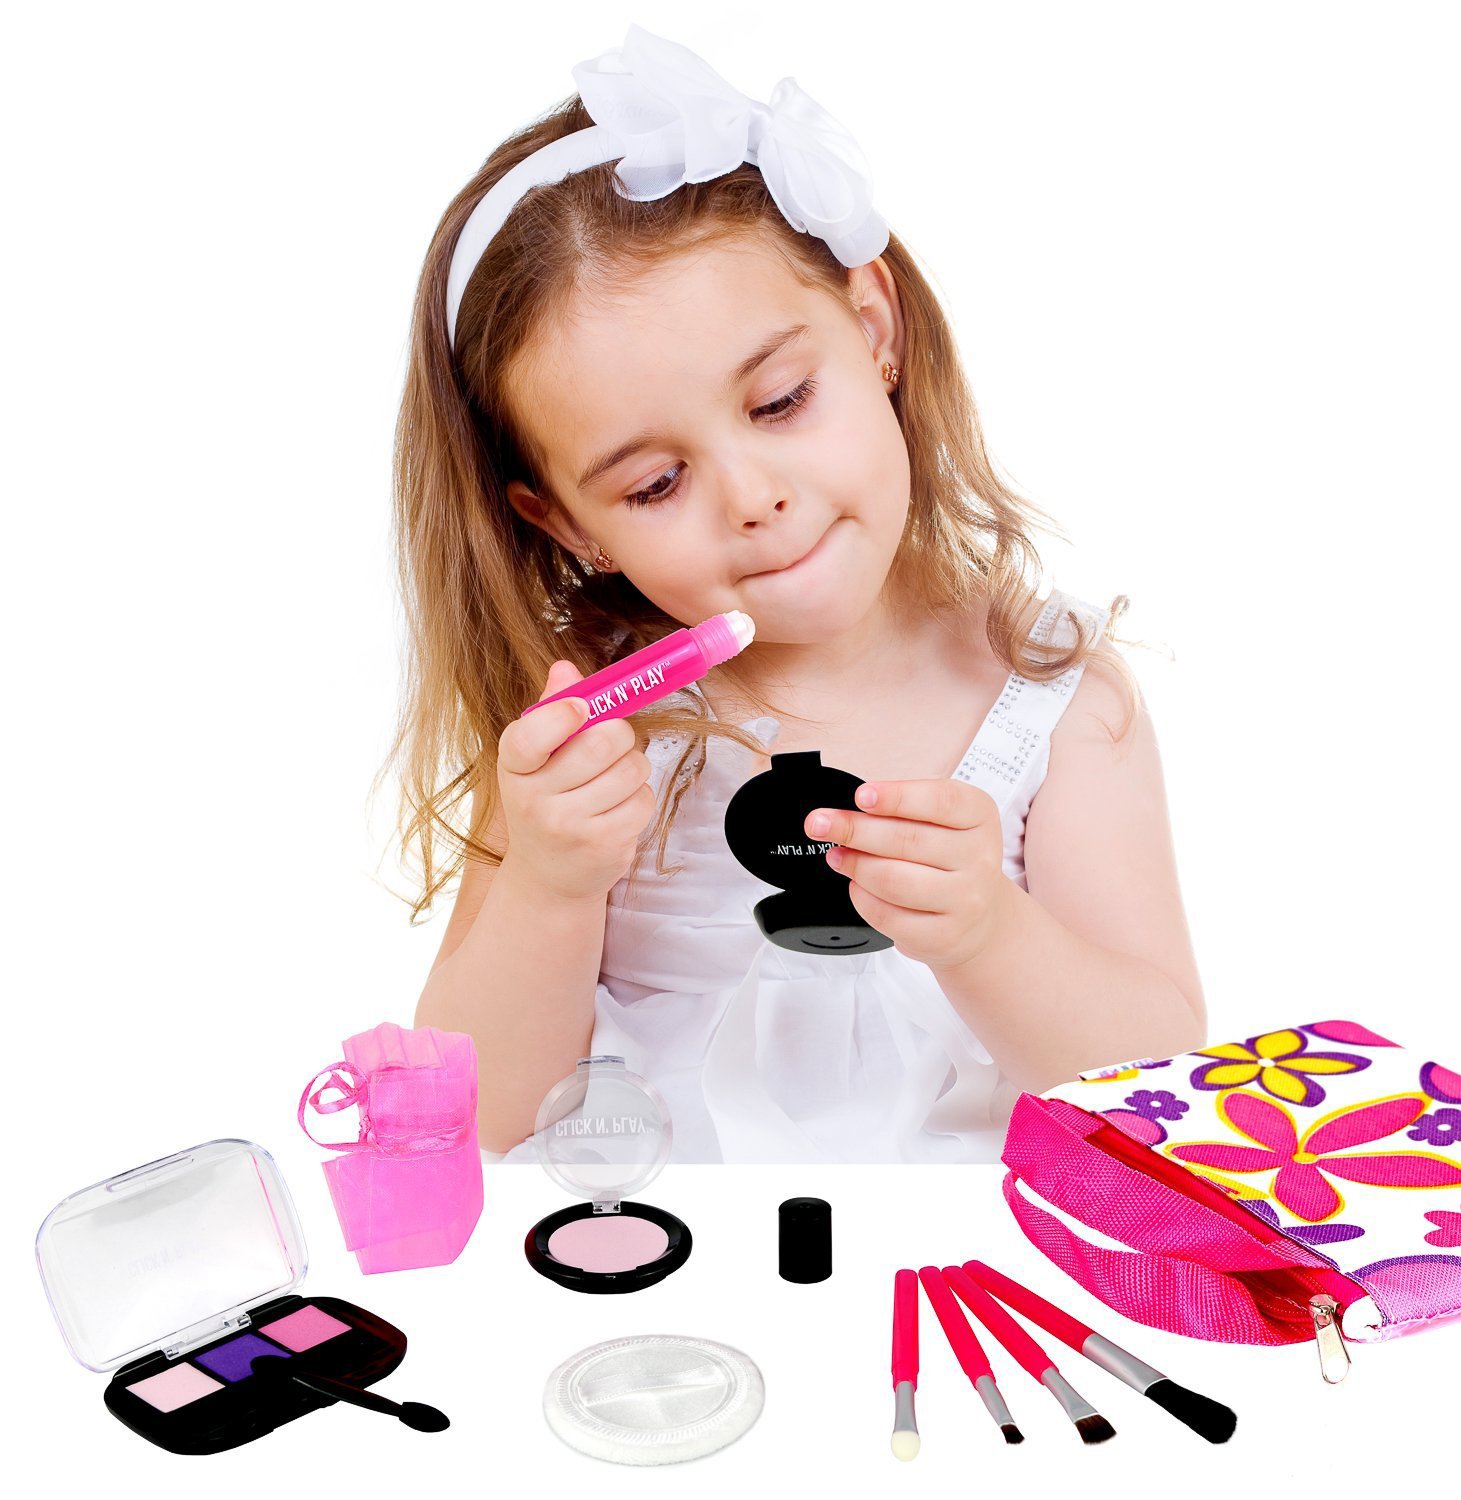 Click N' Play Cosmetic and Makeup Set for Girls, Includes Floral Tote Bag and 8-piece, for Pretend Play